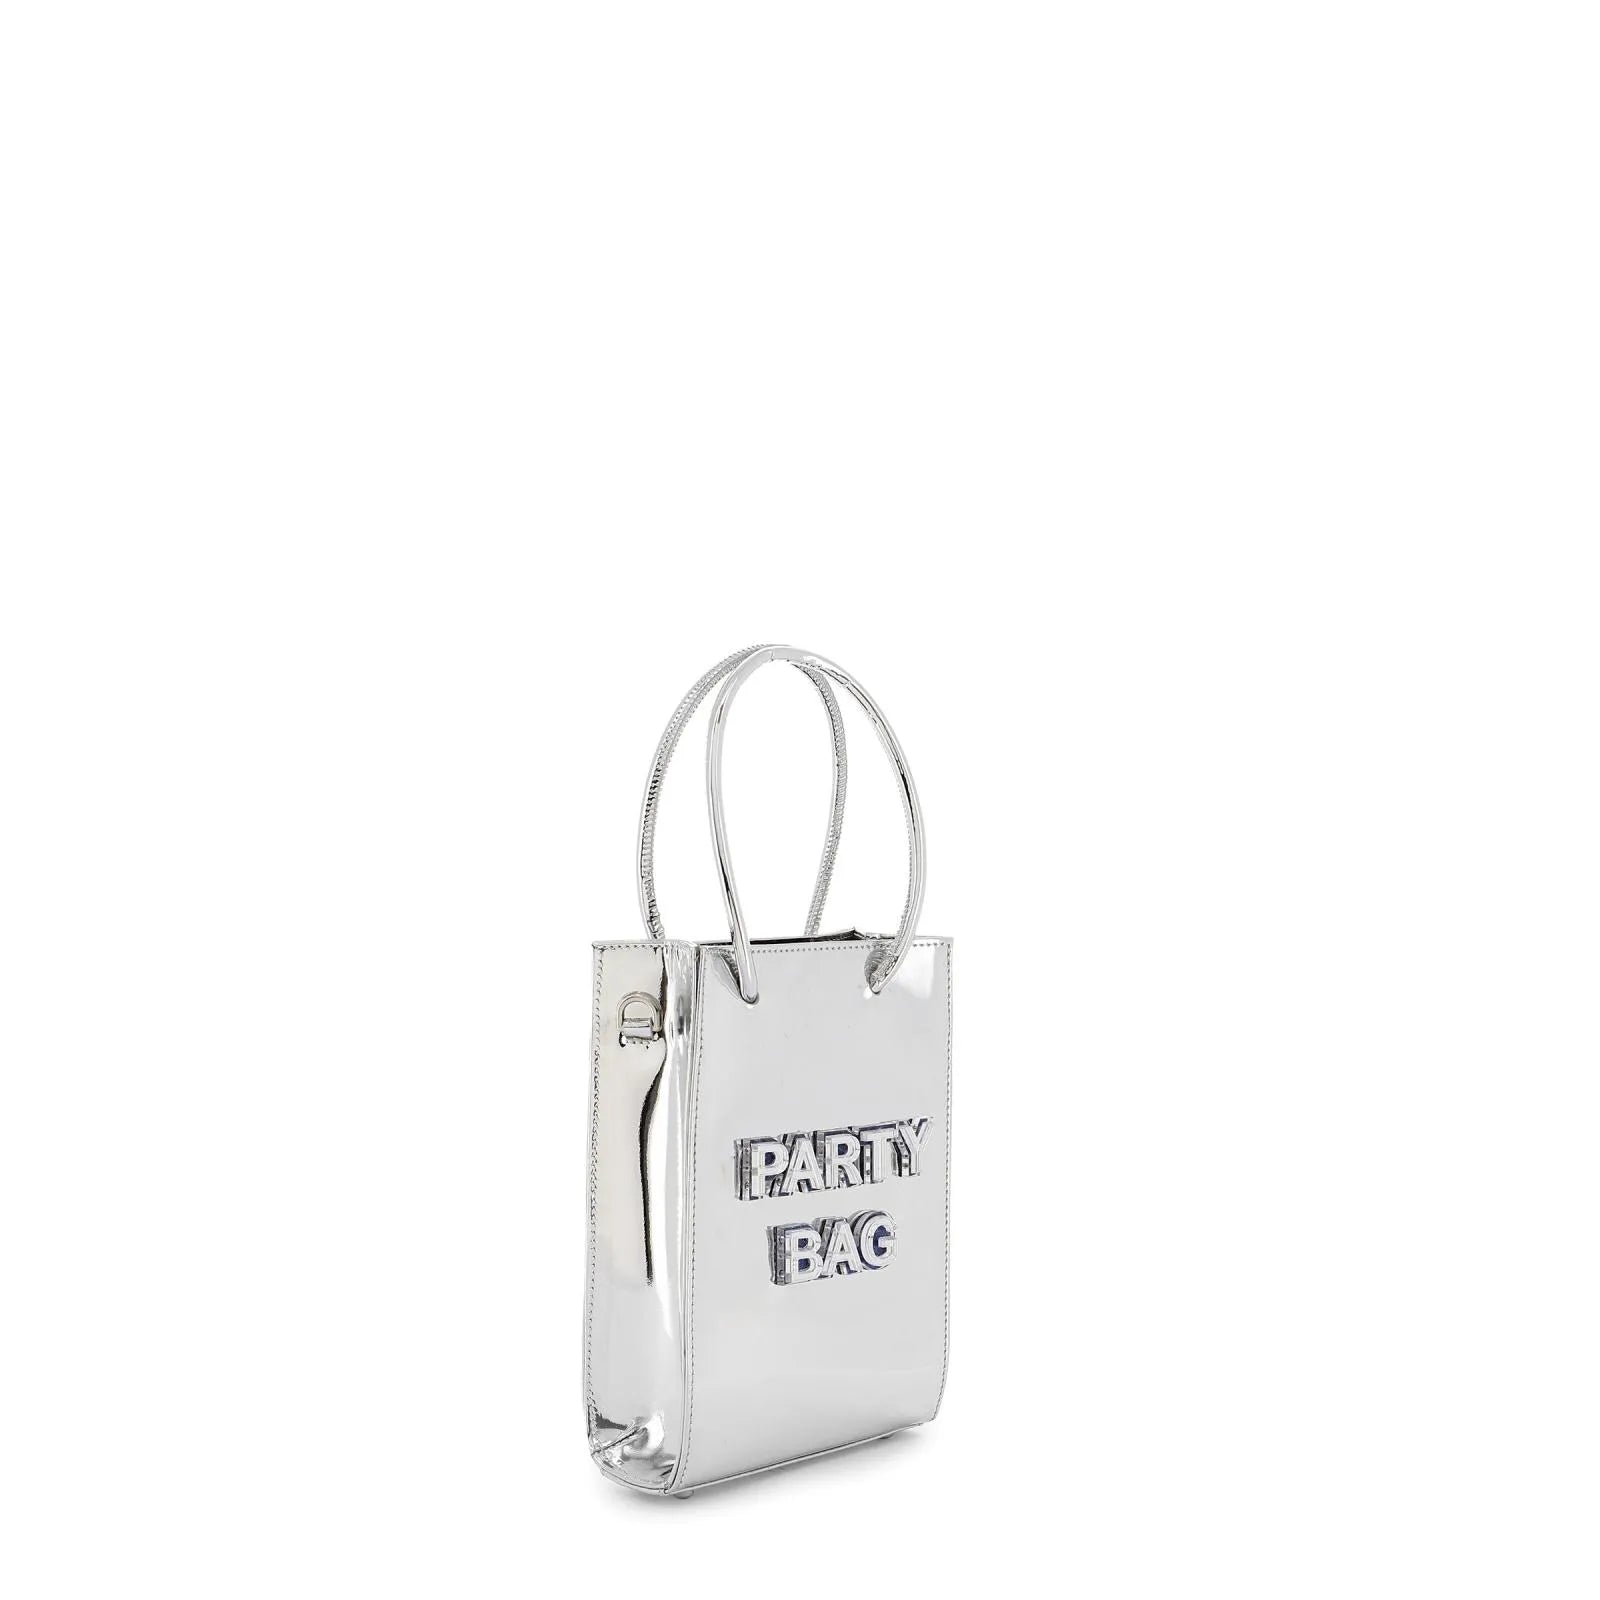 PARTY BAG MICRO TOTE